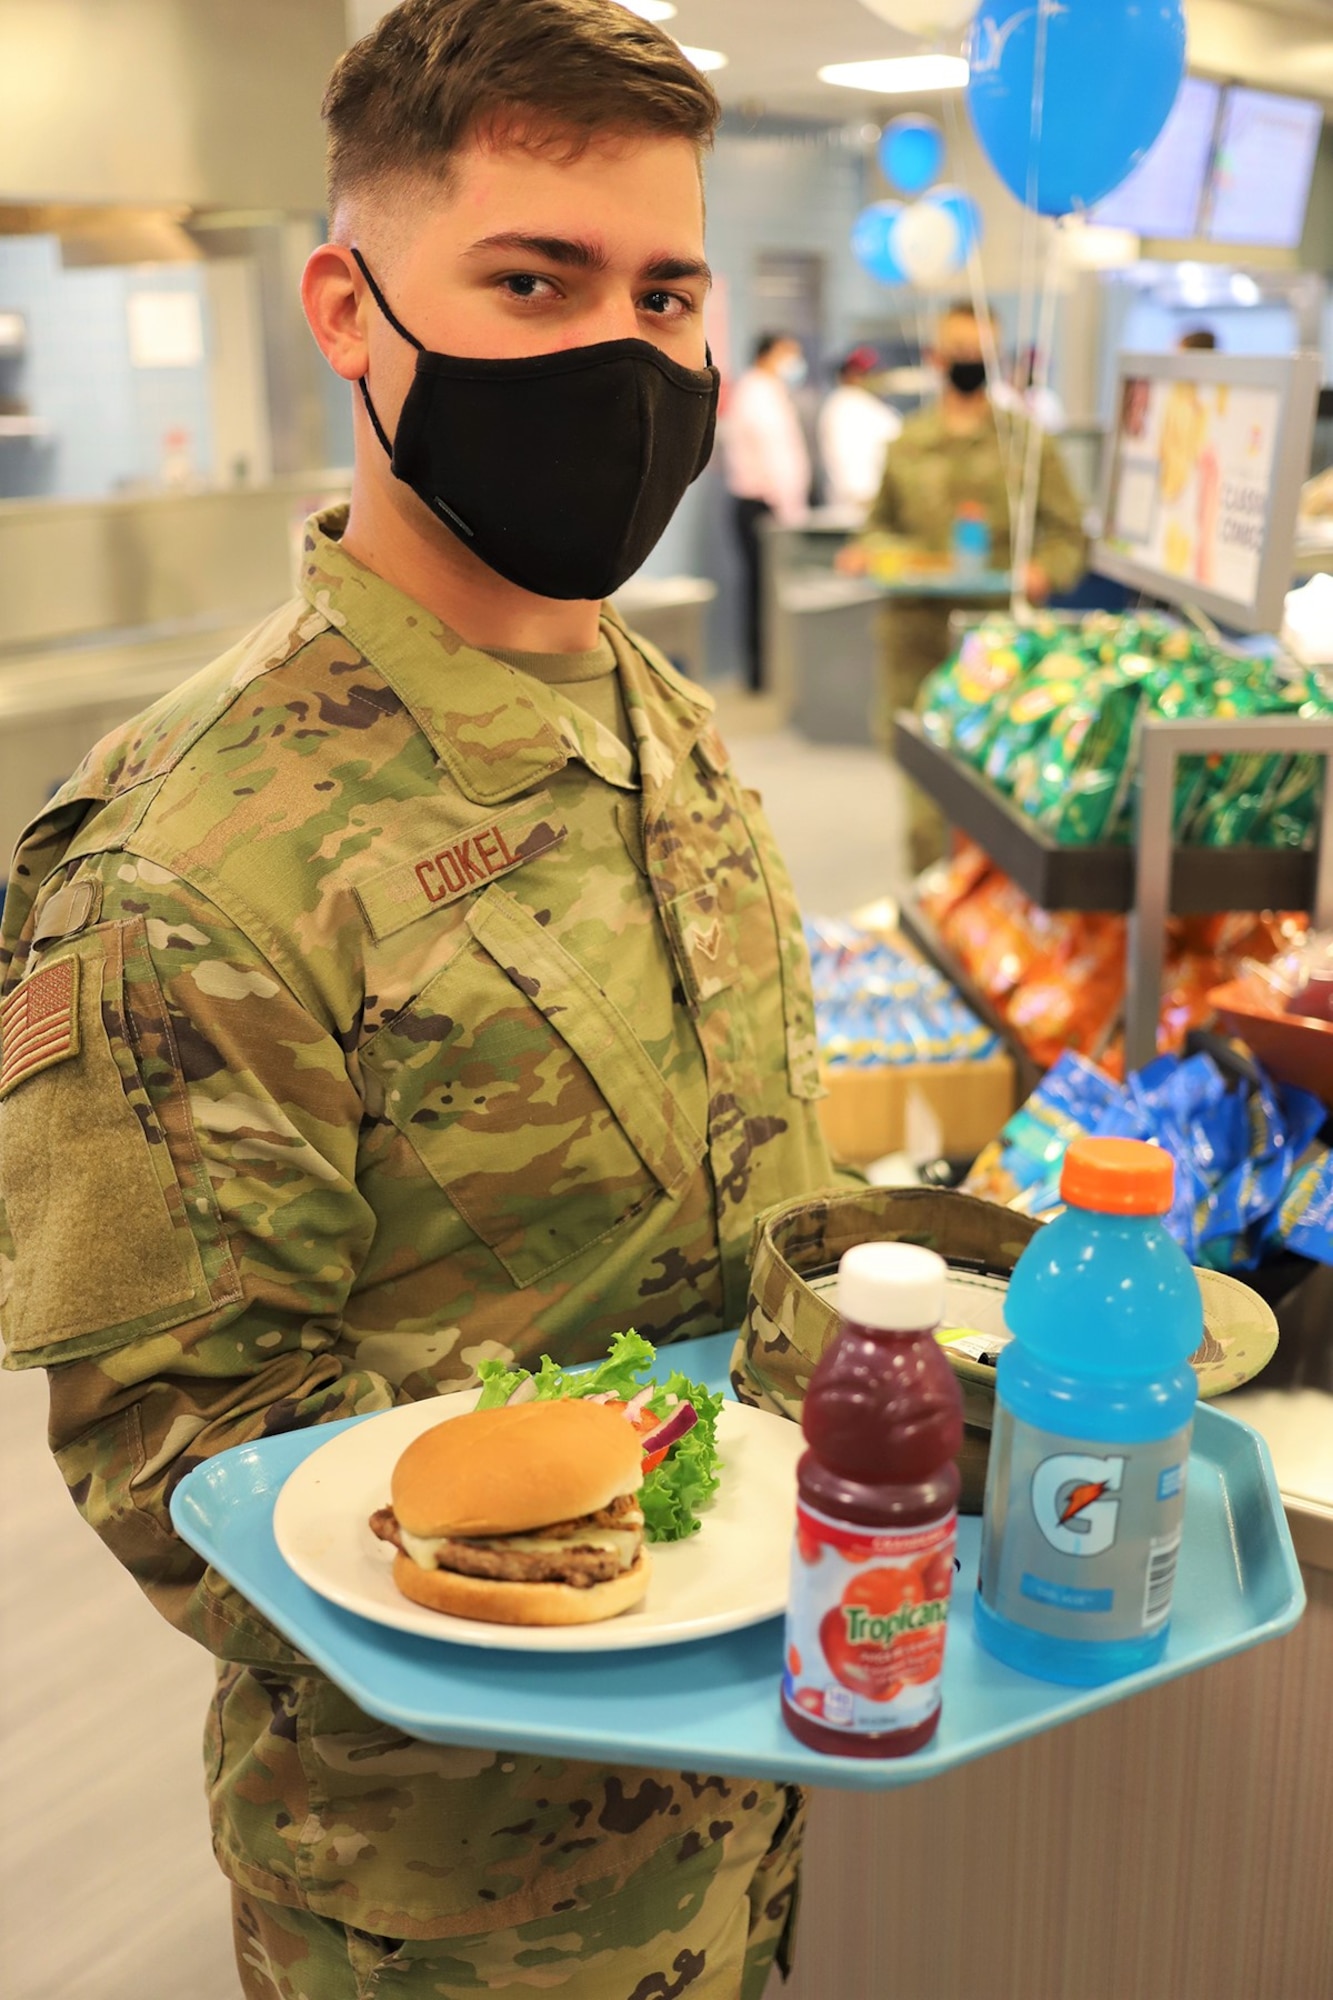 Airman 1st Class Hayden Cokel is ready for lunch at the newly reopened The Beachcombers dining facility at Vandenberg AFB, California, Aug. 6, 2020.